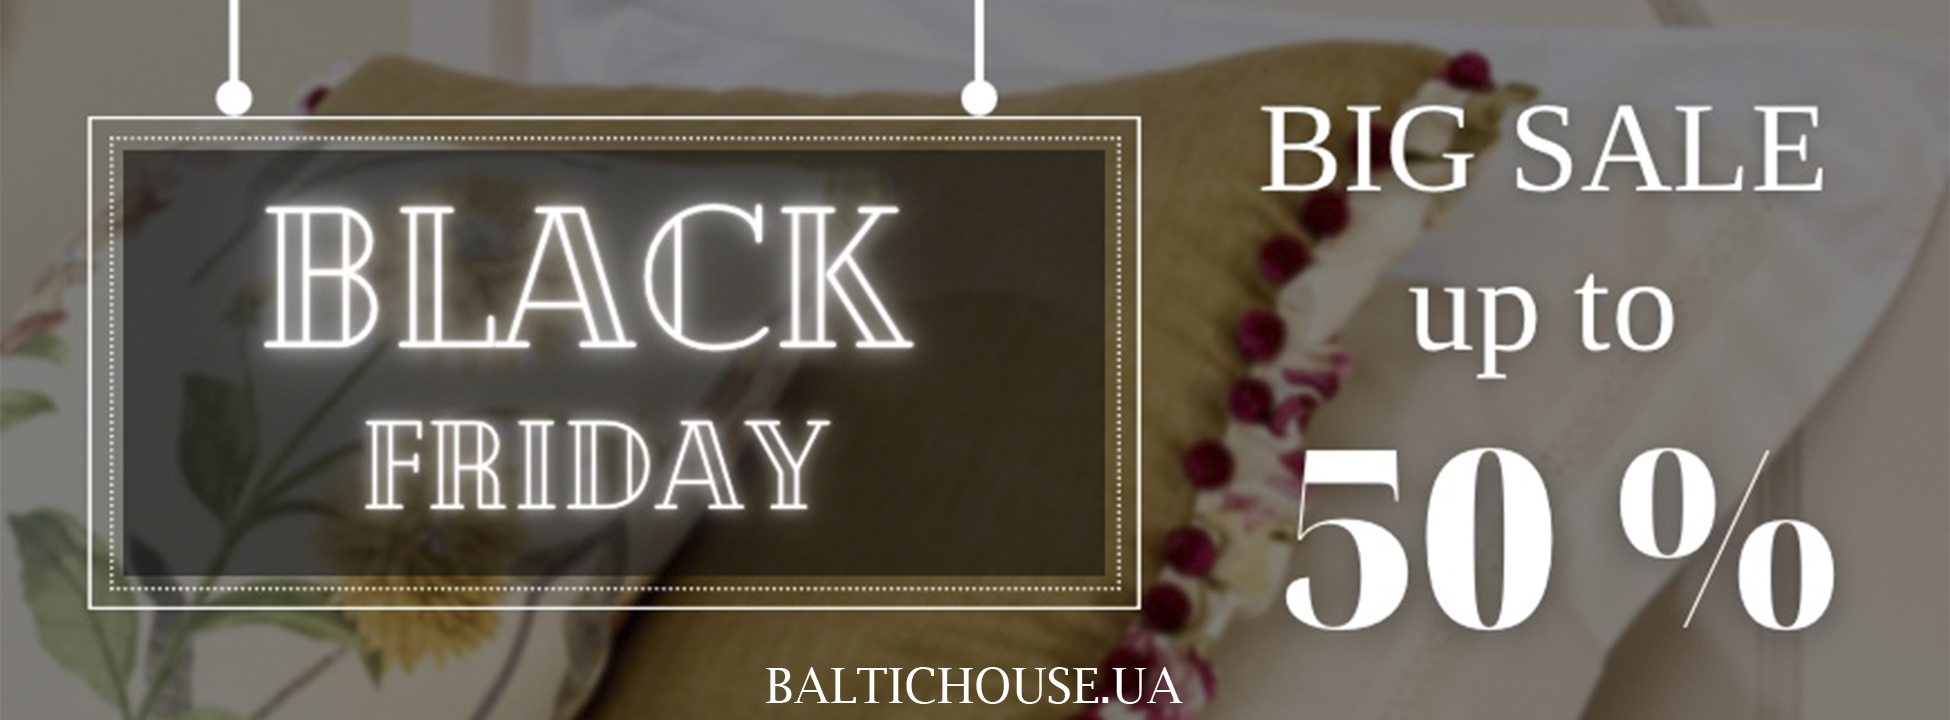 The maximum discount is up to -50% in Baltic